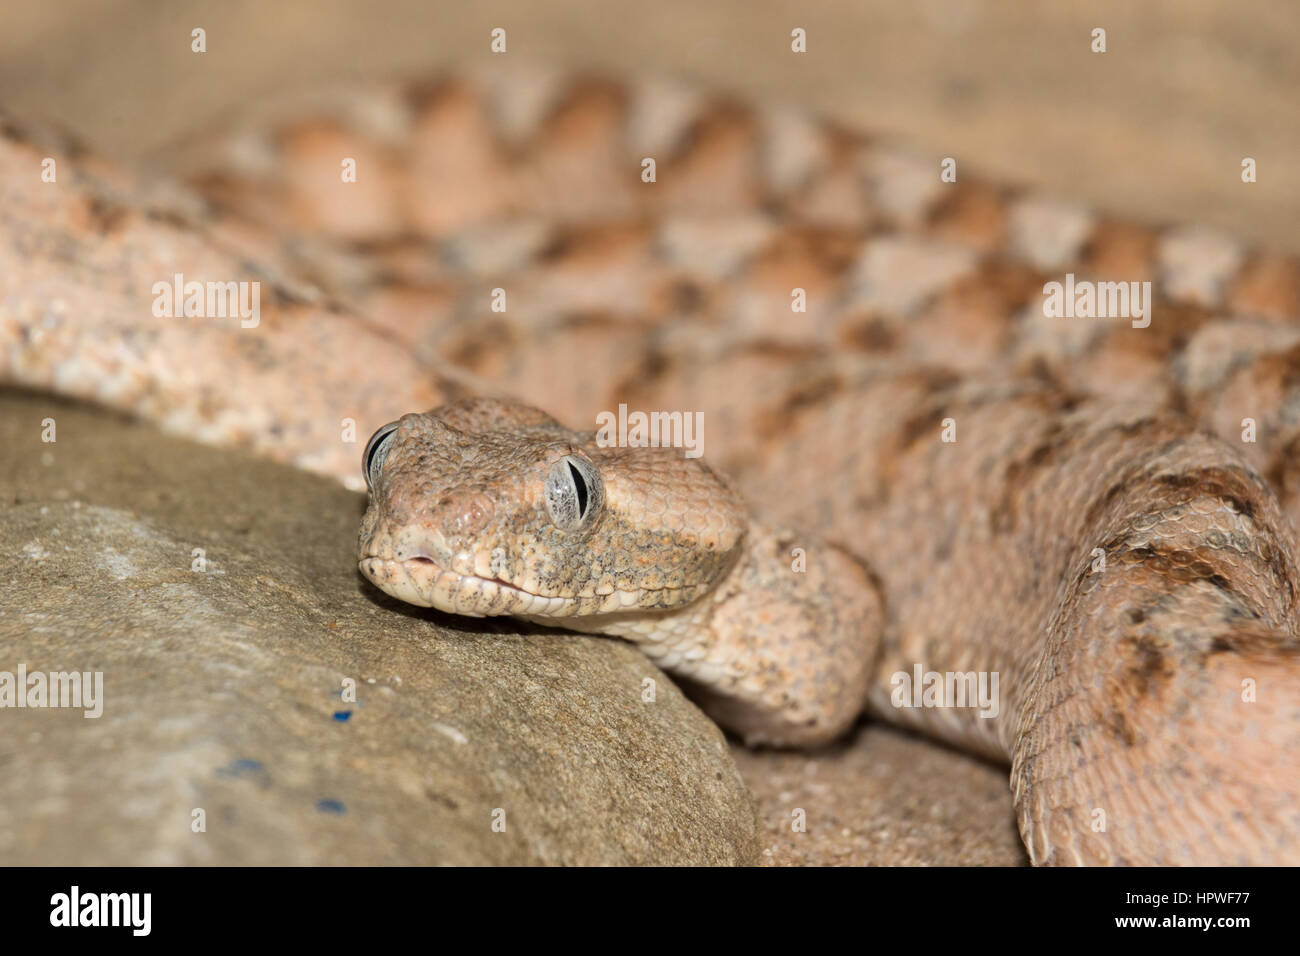 Painted Saw-scaled Viper (Echis coloratus) Stock Photo